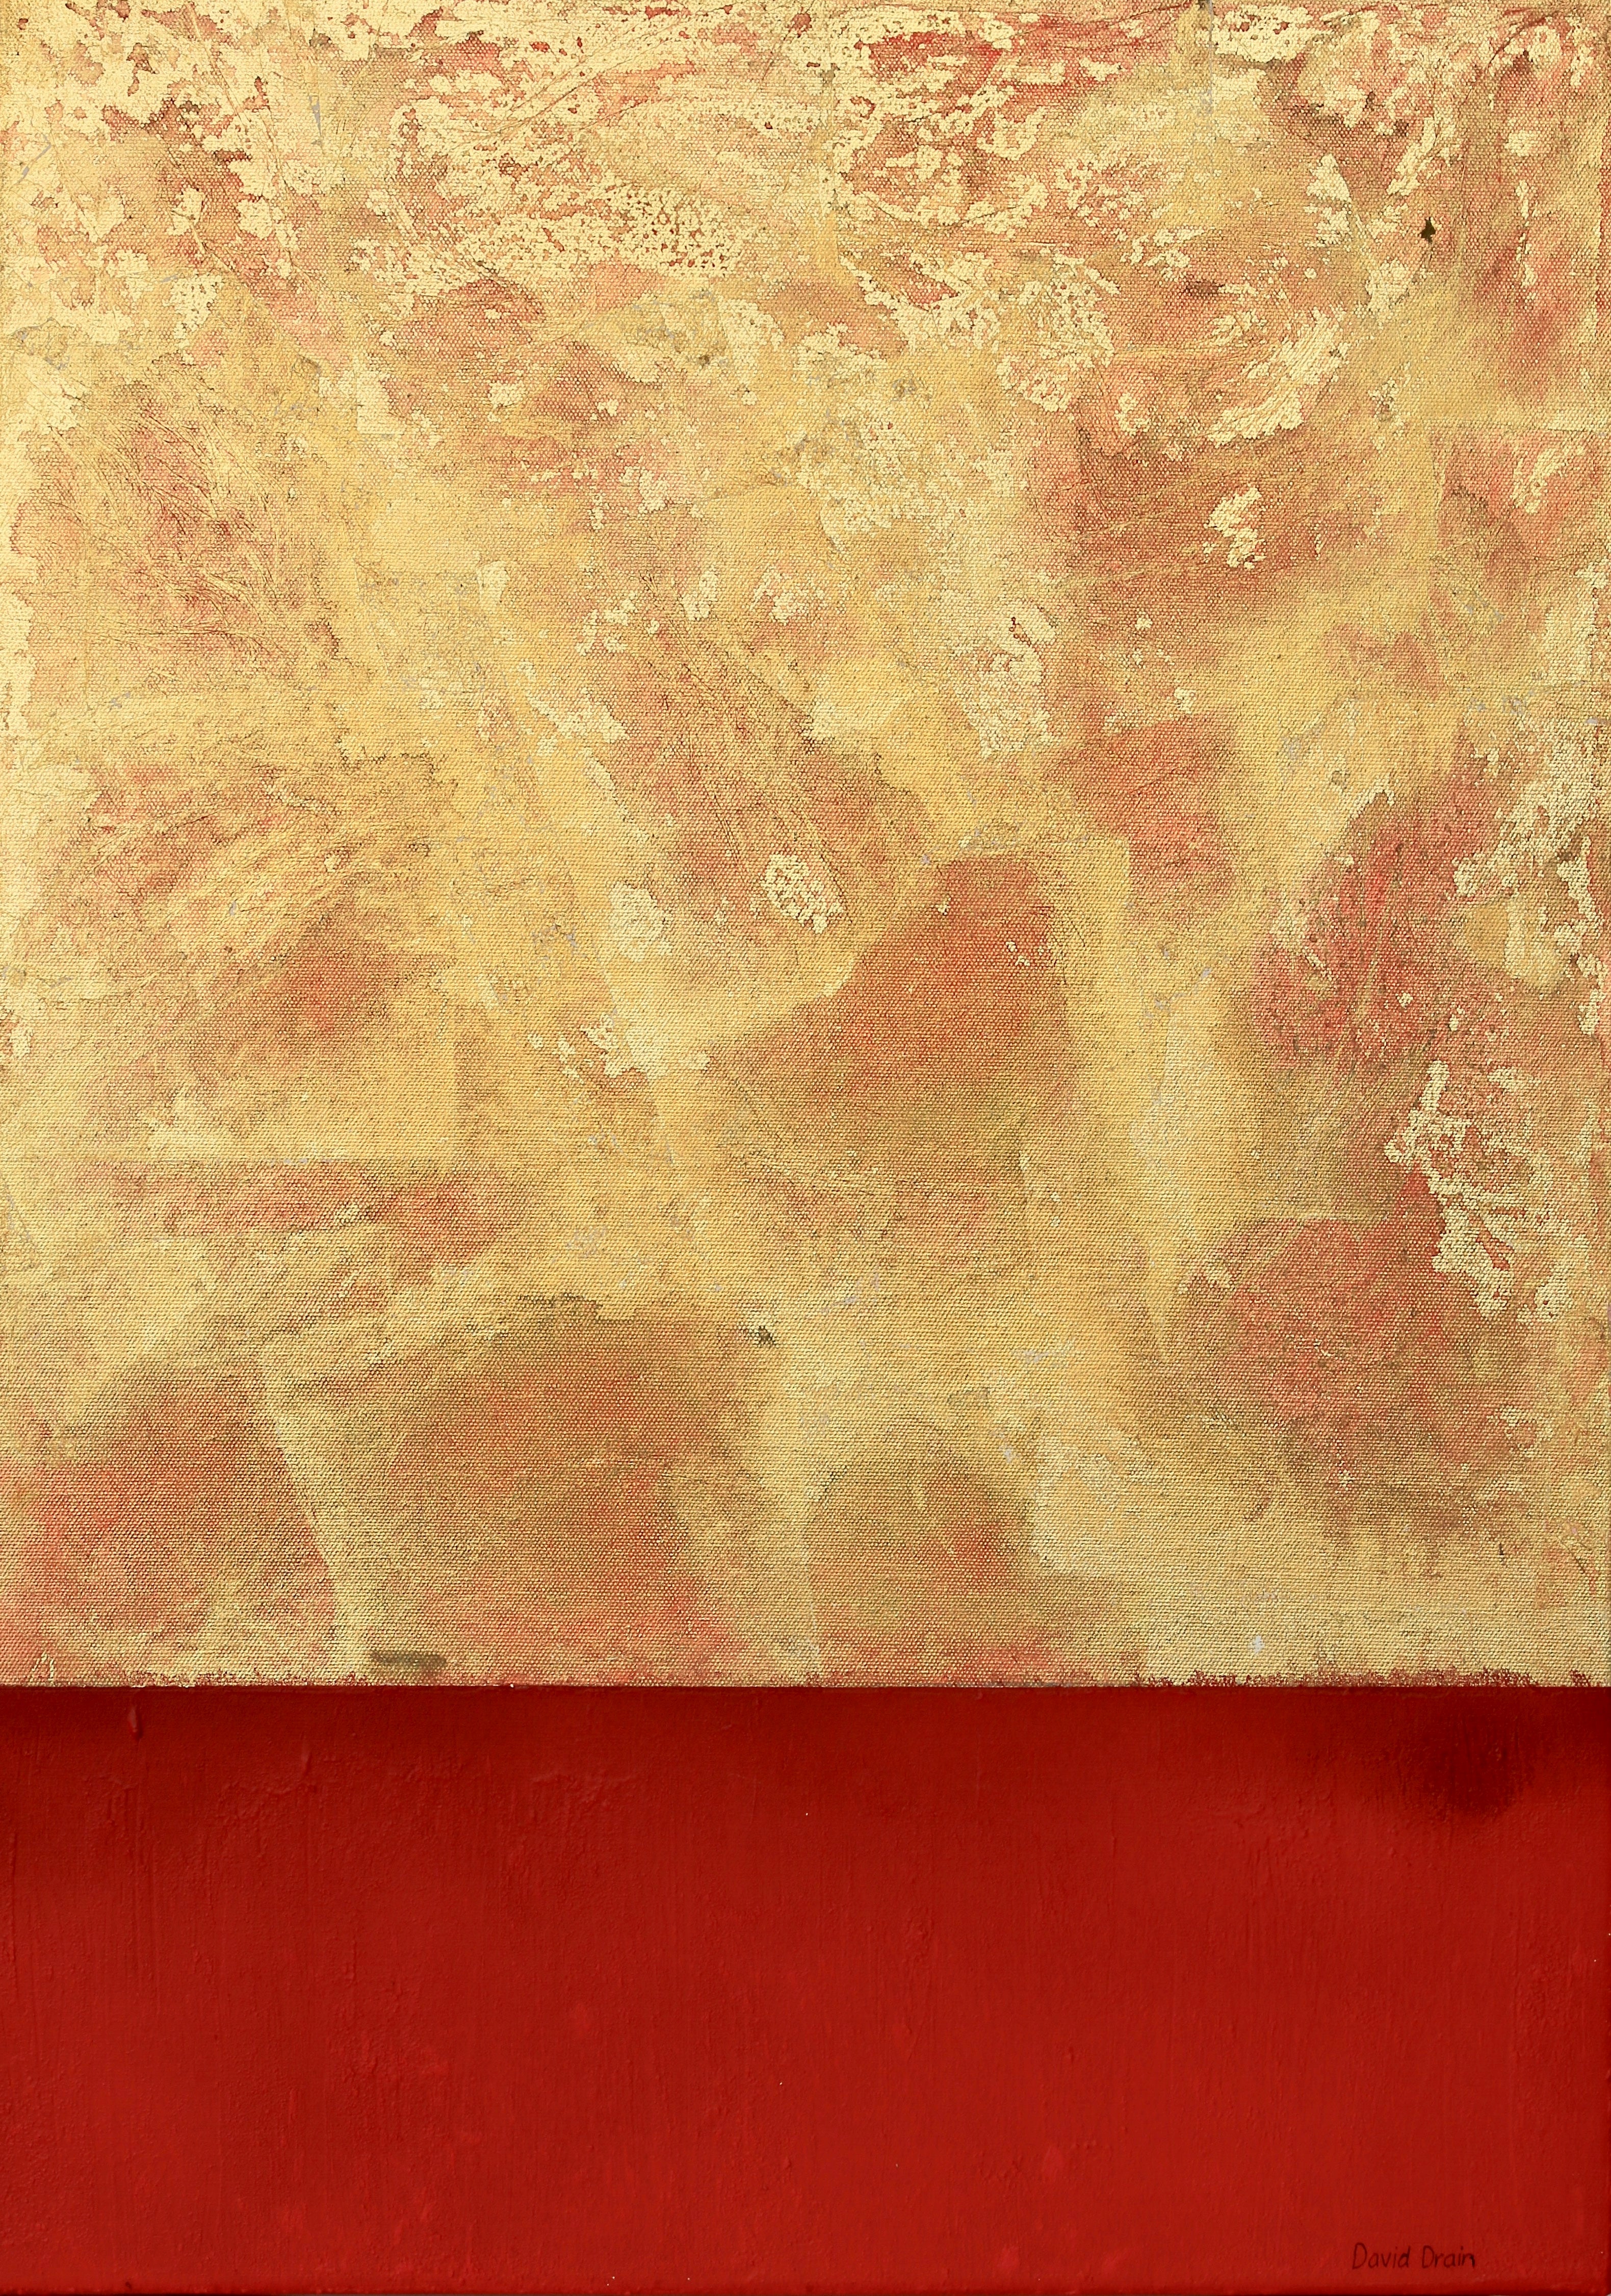 Red & Gold II (SOLD) <br> 70 x 50 x 2 cm